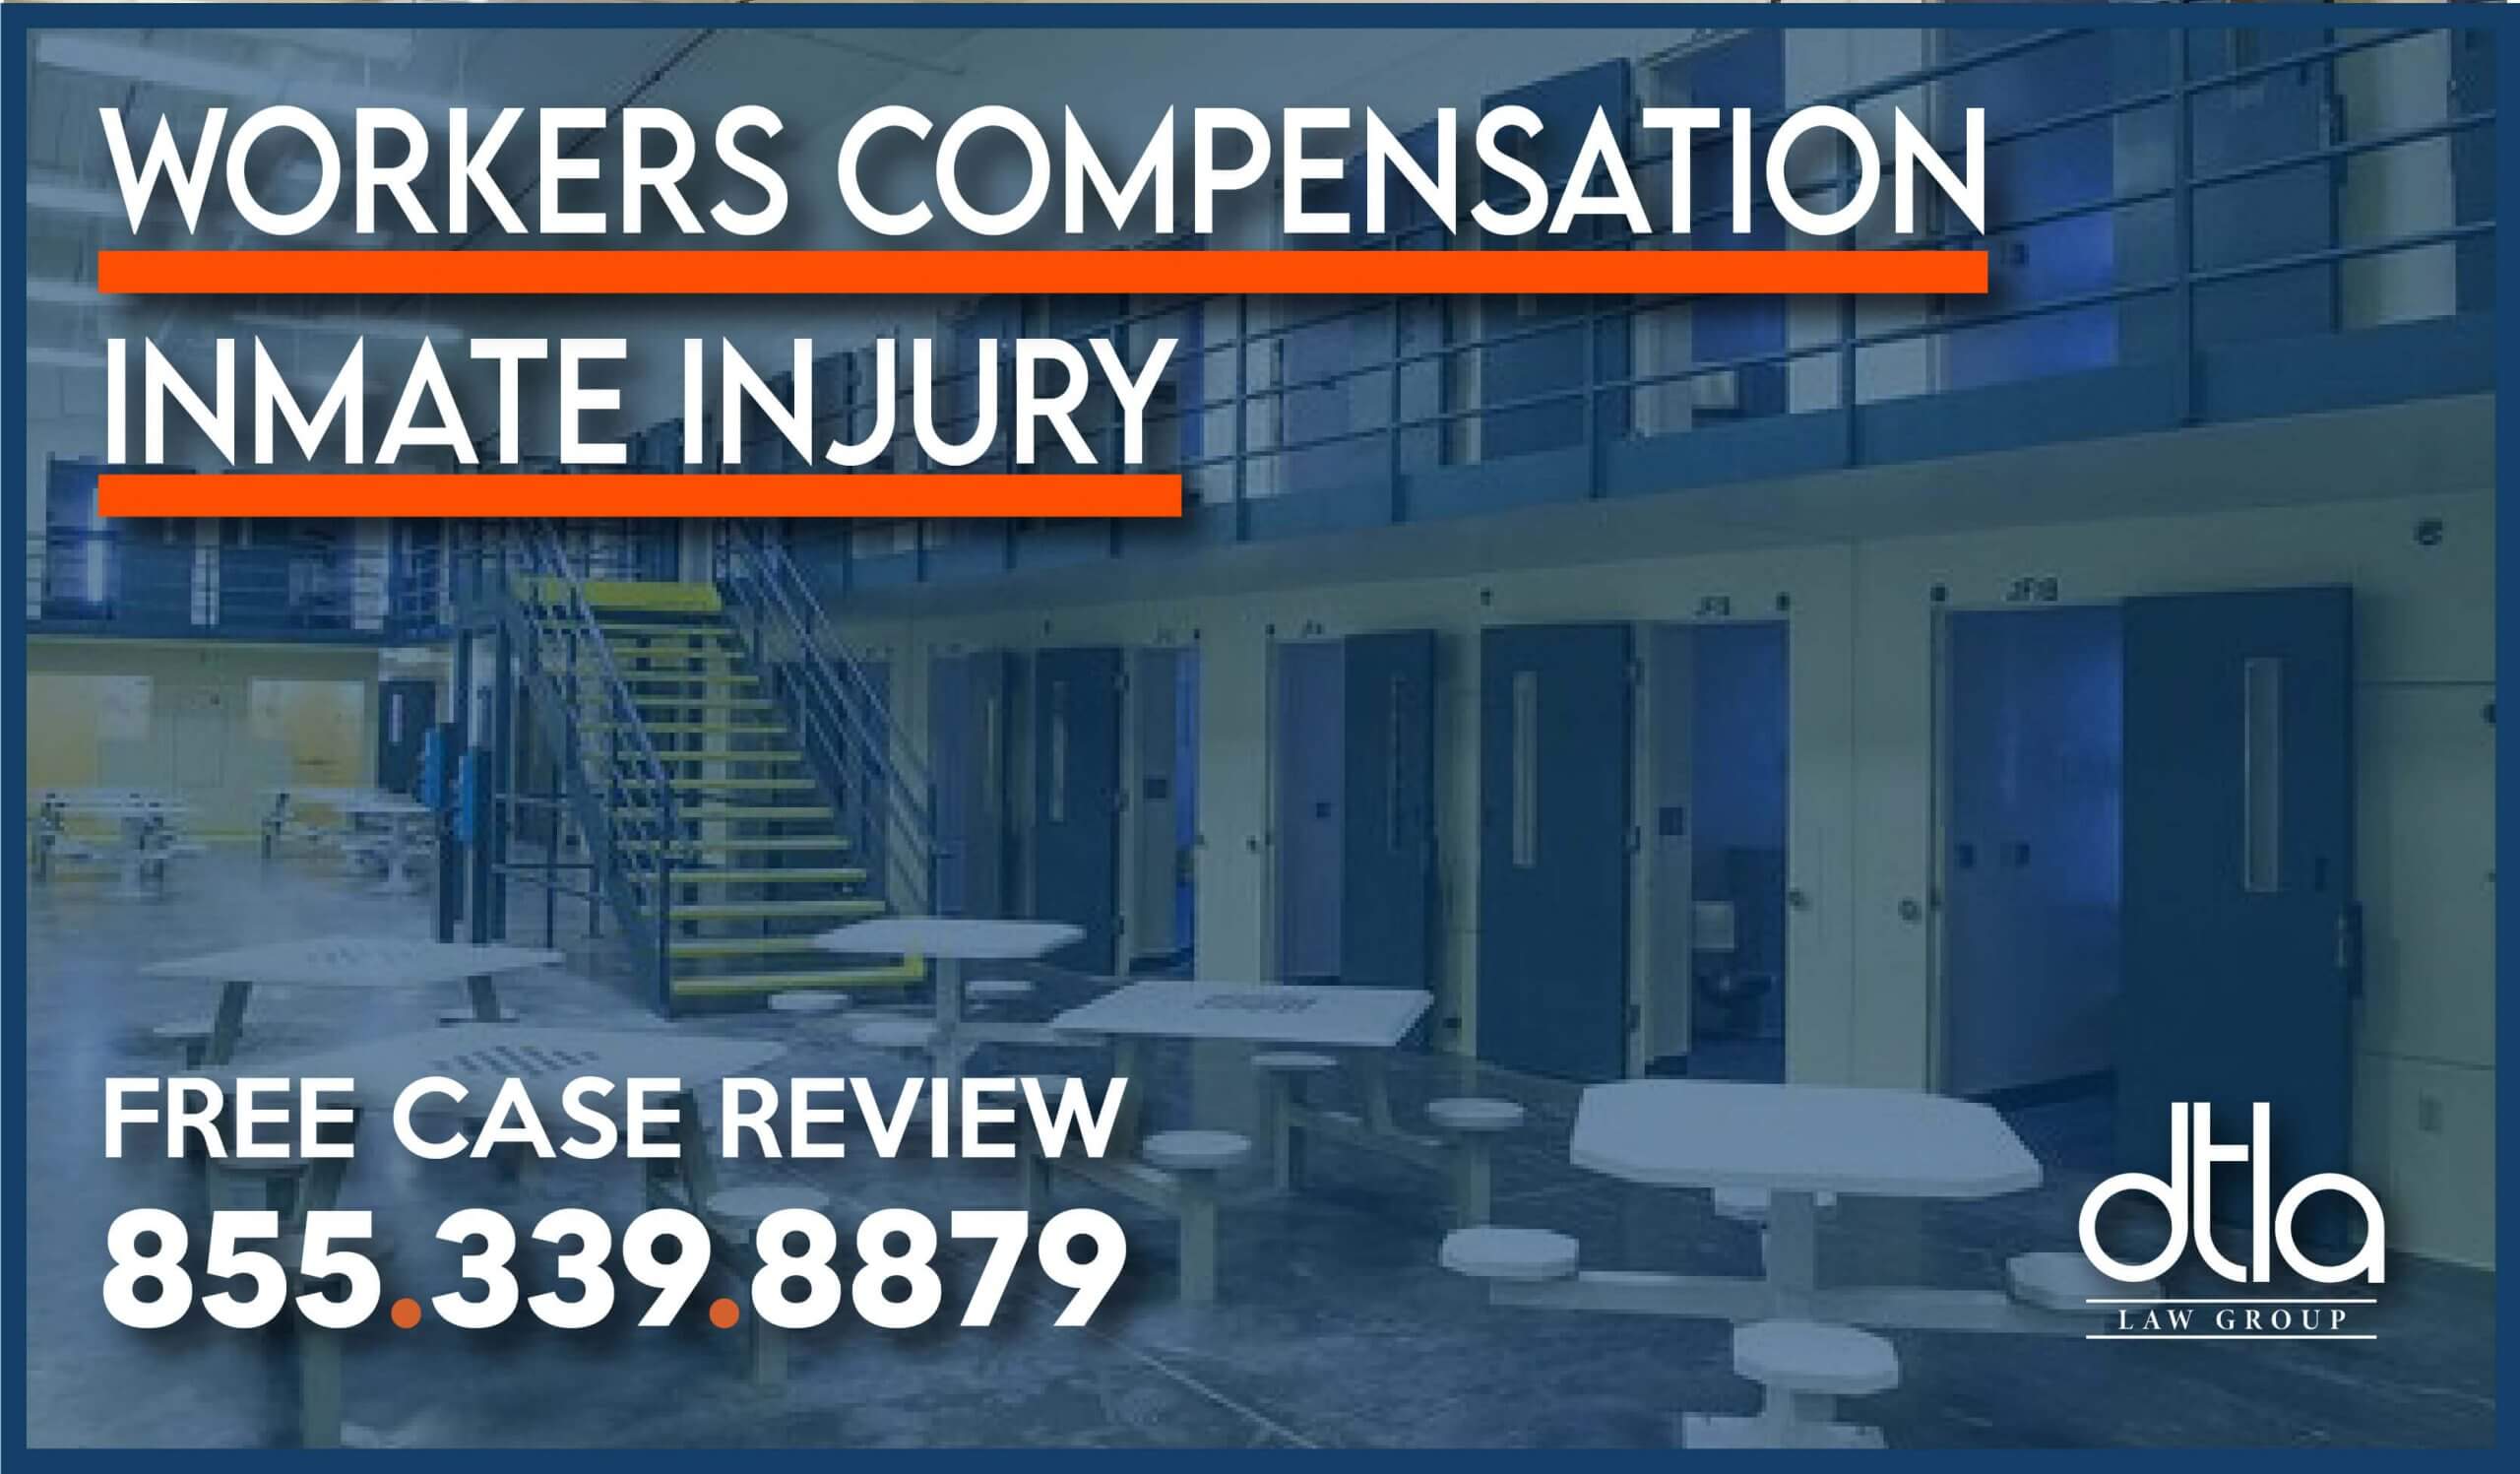 Prisoner Rights – Workers Compensation Inmate Injury lawyer sue compensation attorney